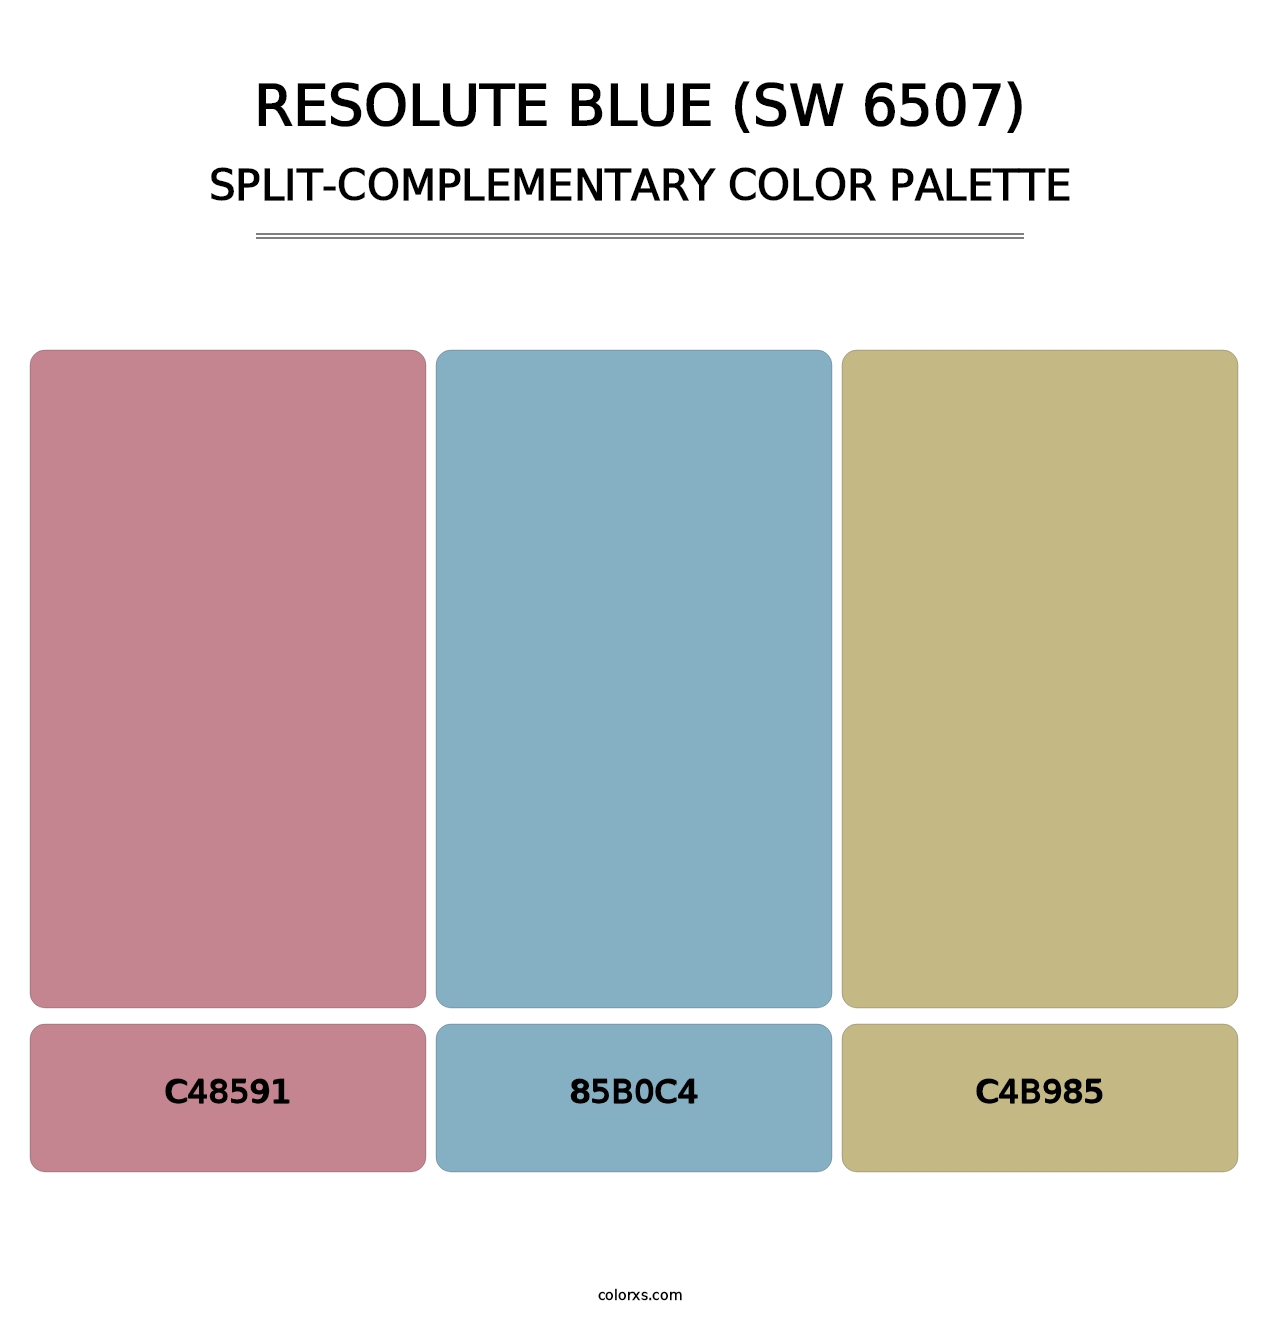 Resolute Blue (SW 6507) - Split-Complementary Color Palette